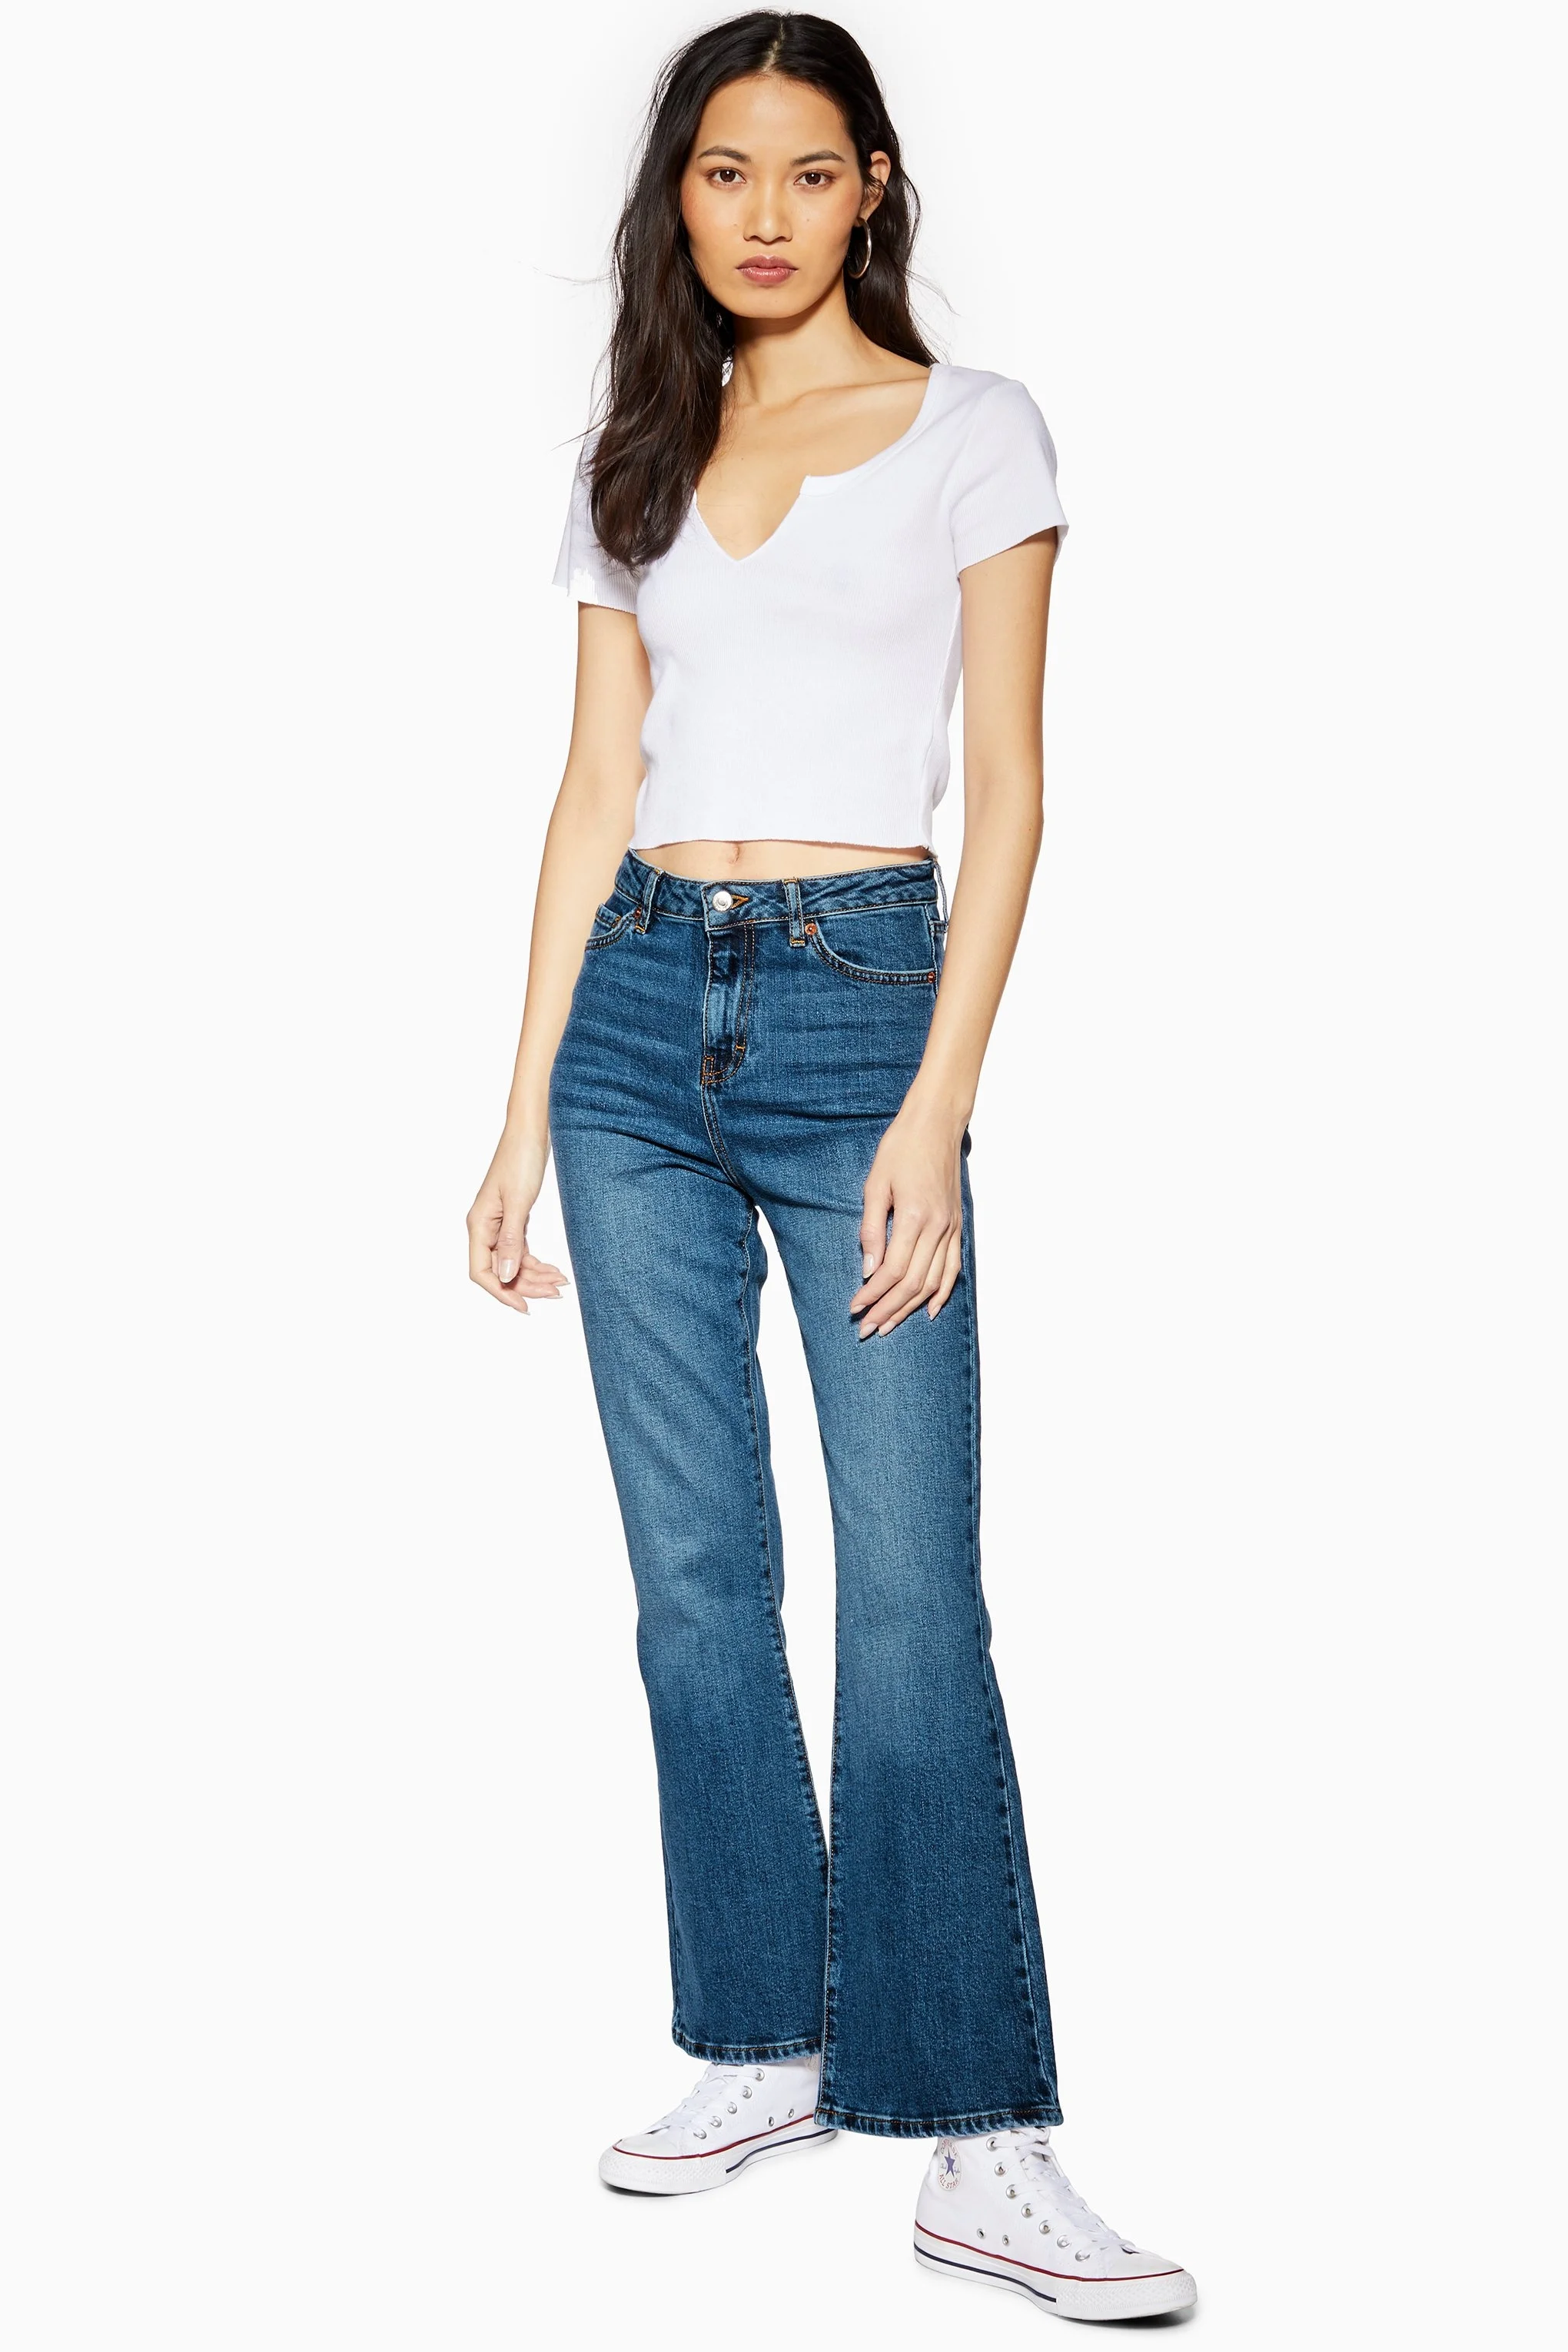 Topshop Tall Mom jeans in white